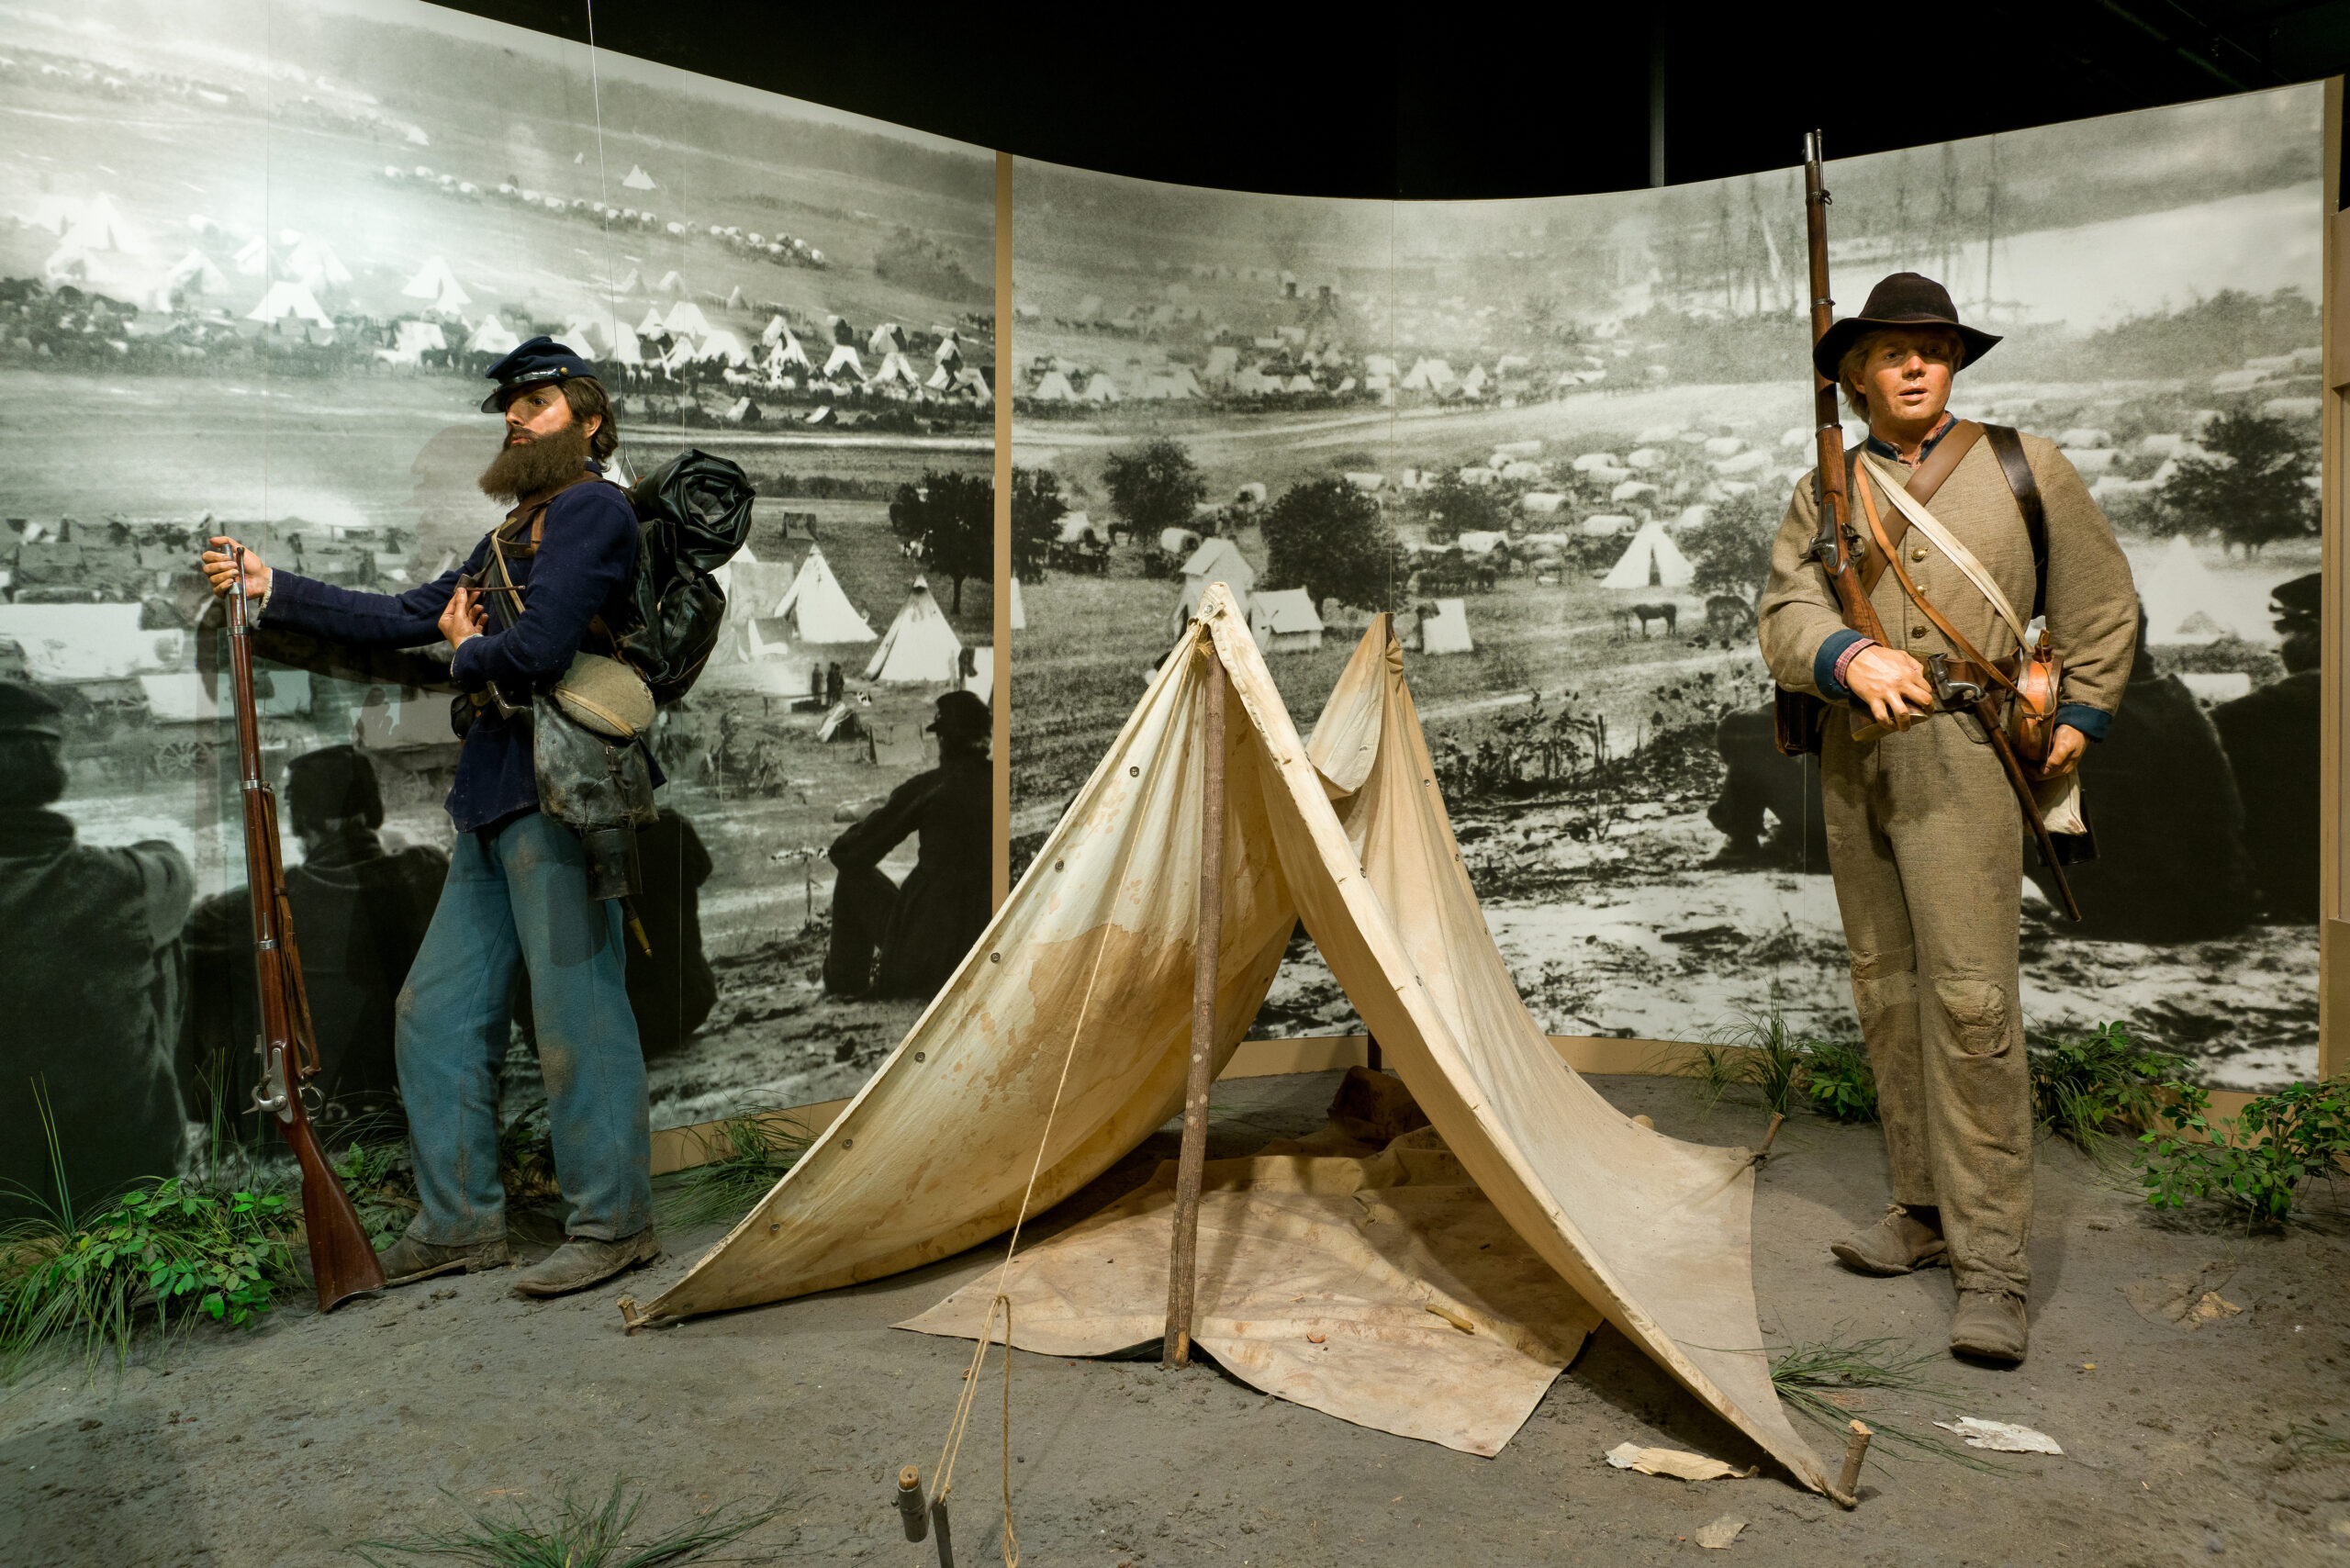 turning point: the American civil war